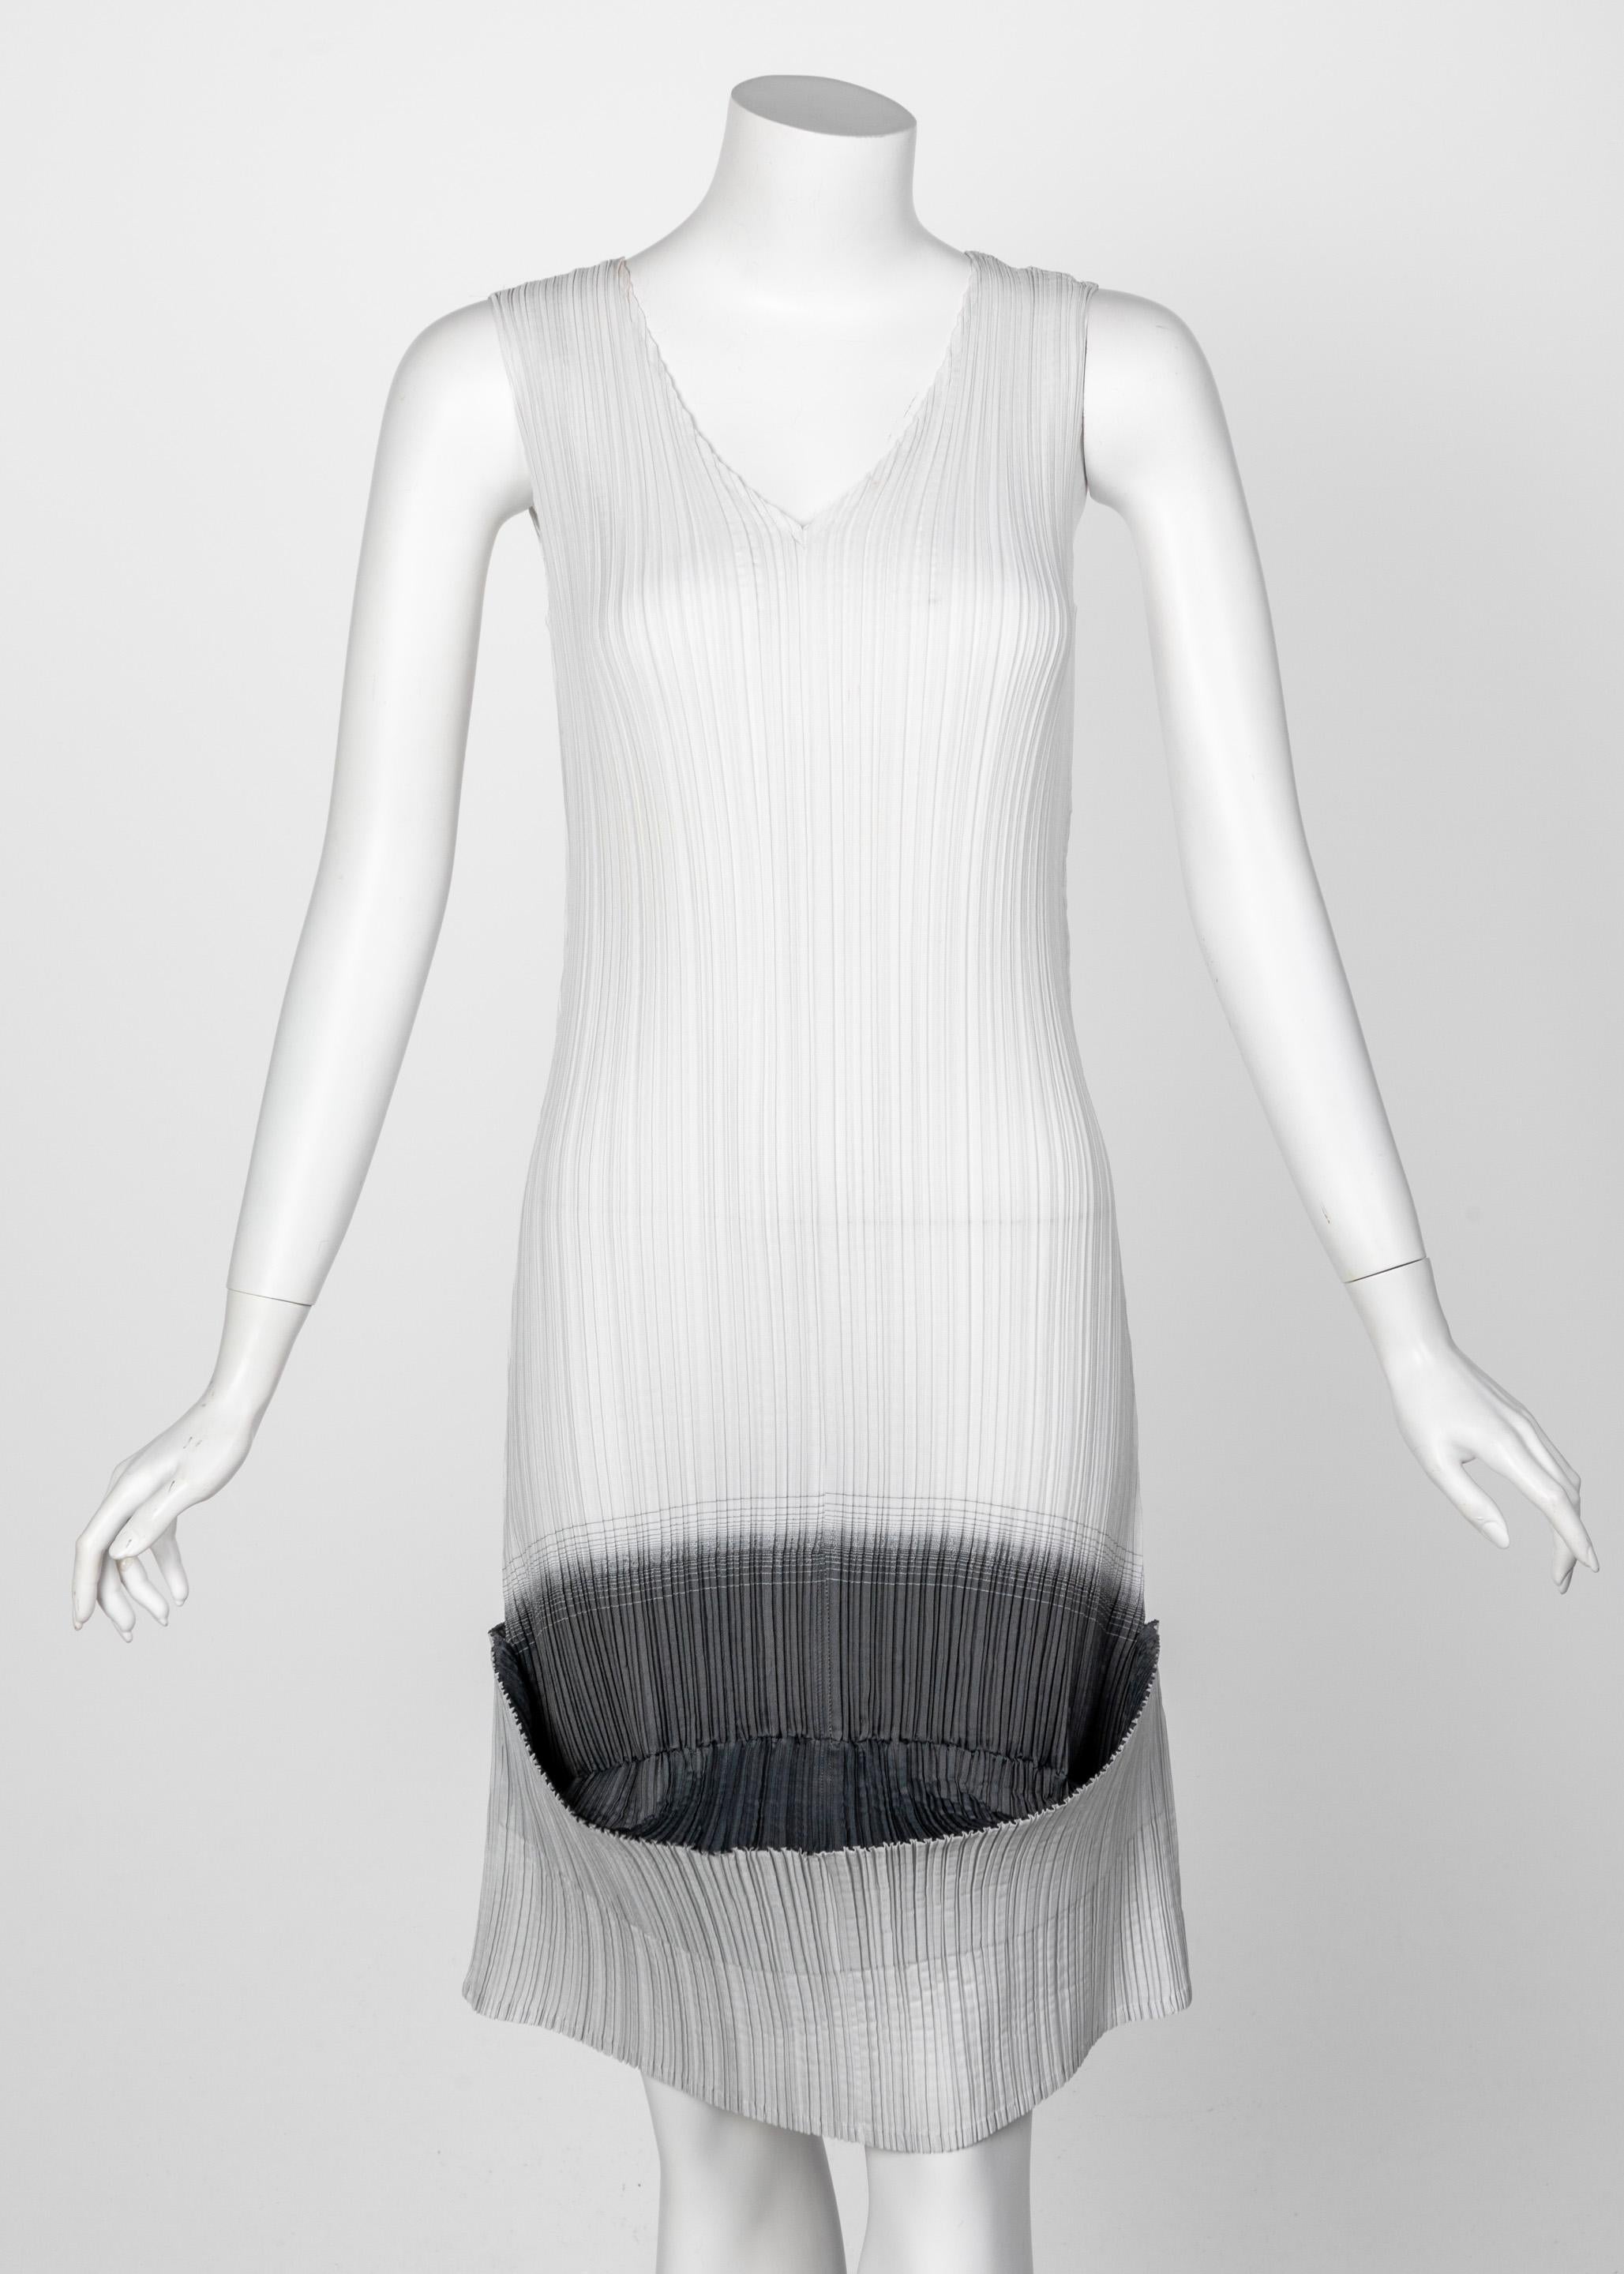 Issey Miyake “A Piece of Cloth” 2-Way White Gray Sleeveless Sculptural Dress In Excellent Condition For Sale In Boca Raton, FL